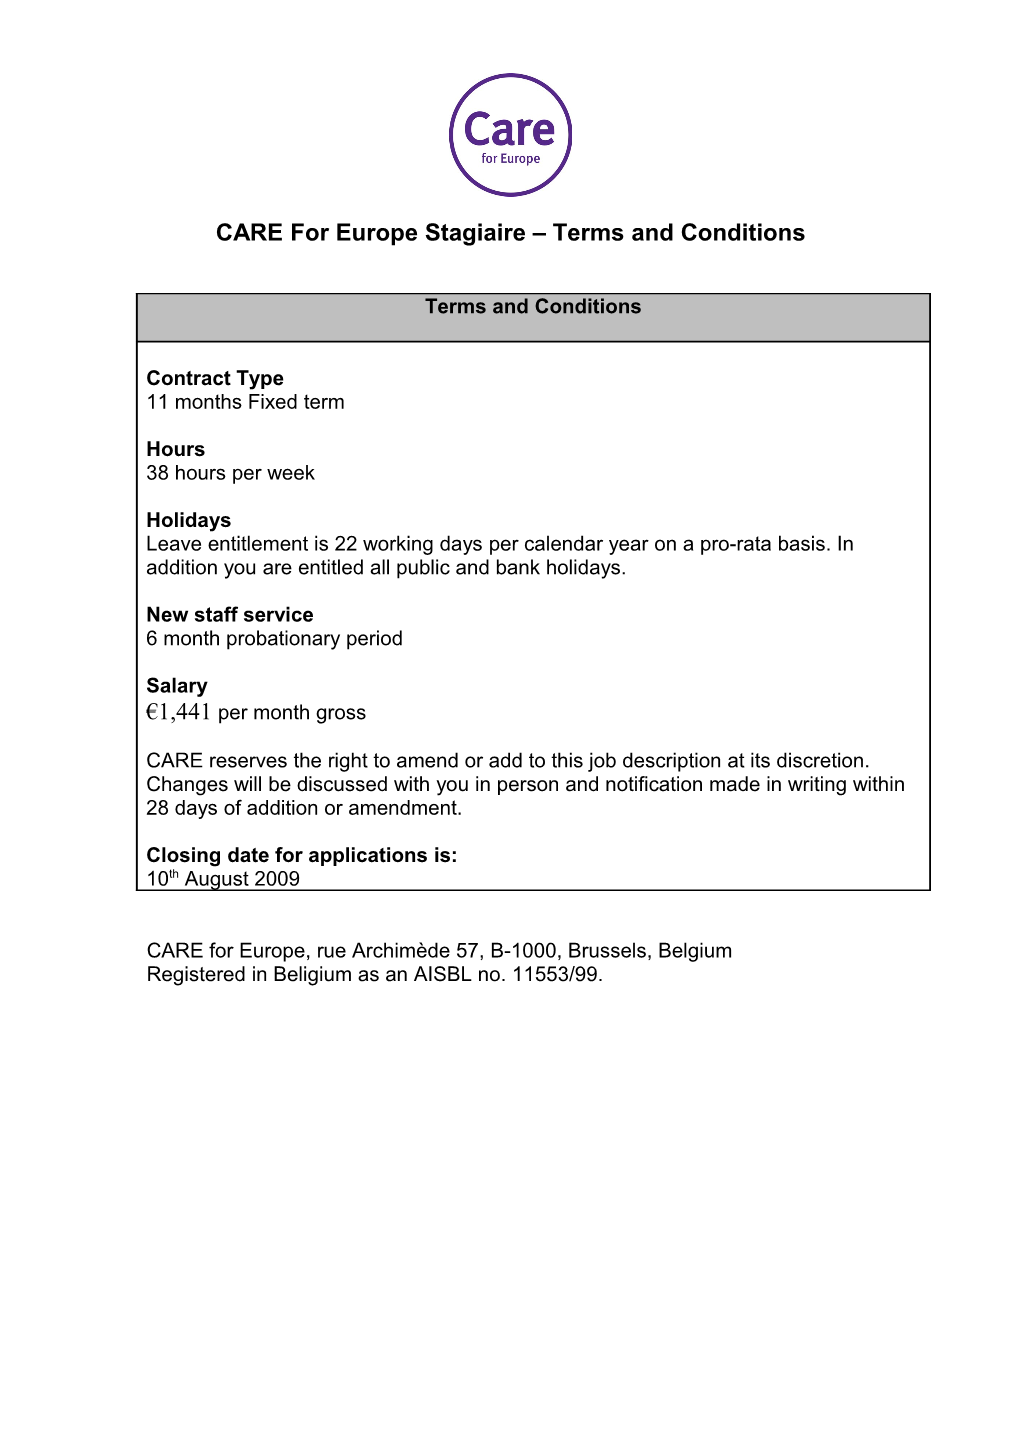 CARE for Europe Stagiaire - Job Profile